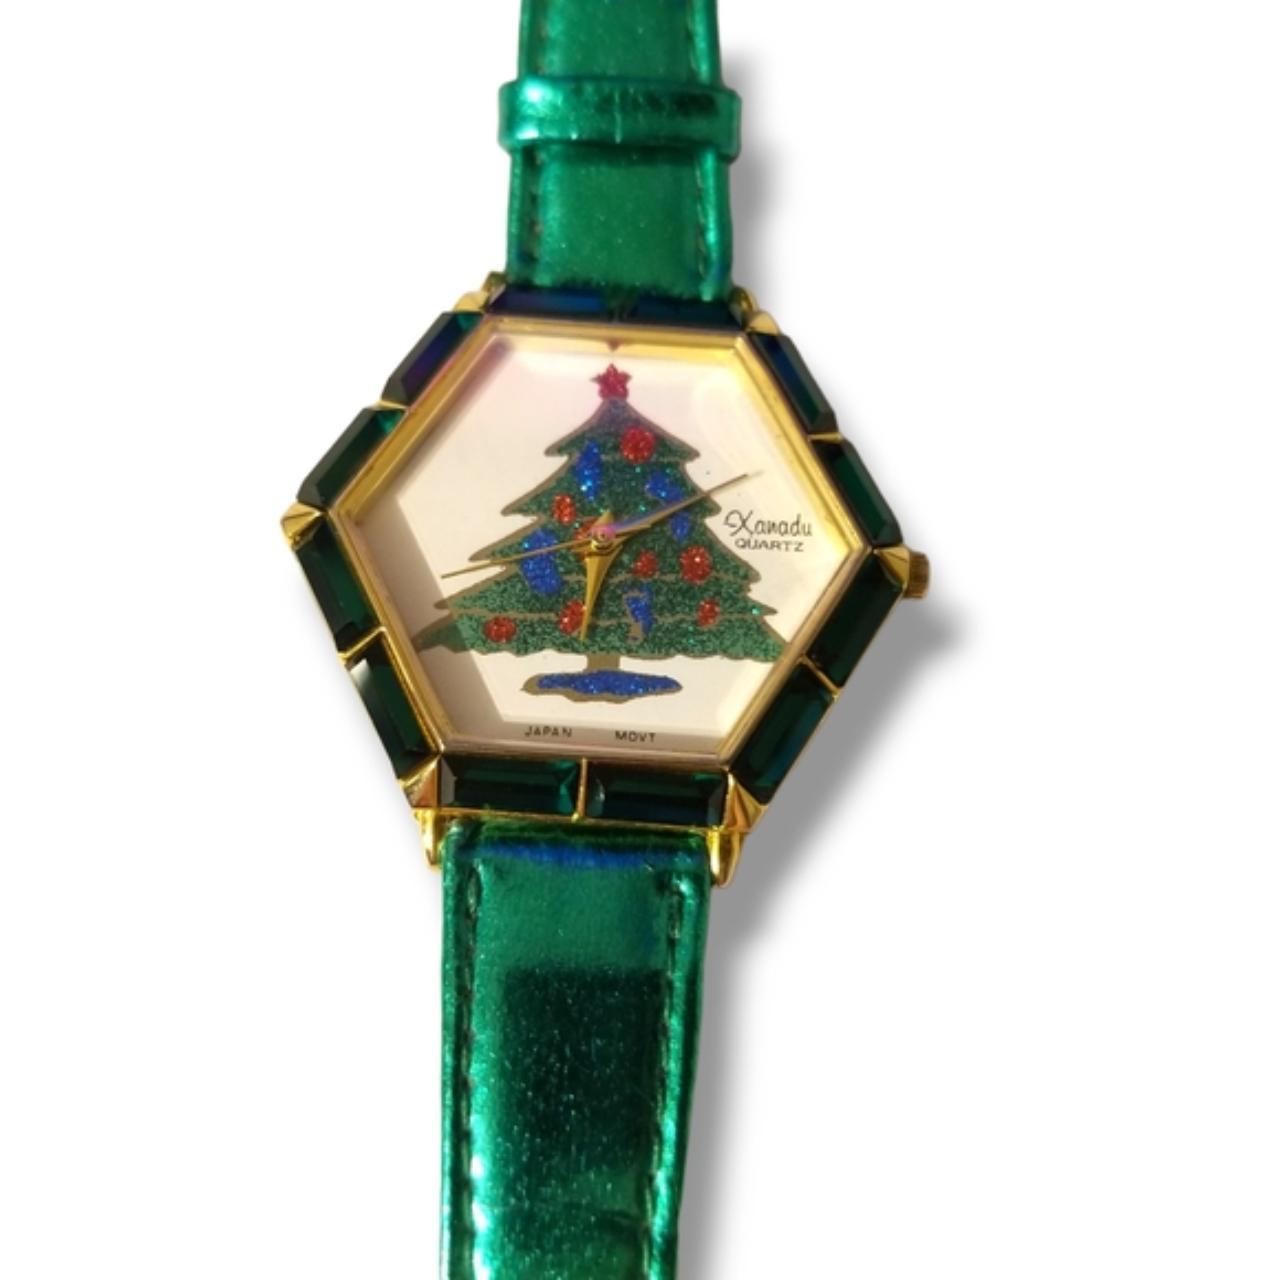 Xanadu Two-faced watch | Watches, Shopping, Accessories